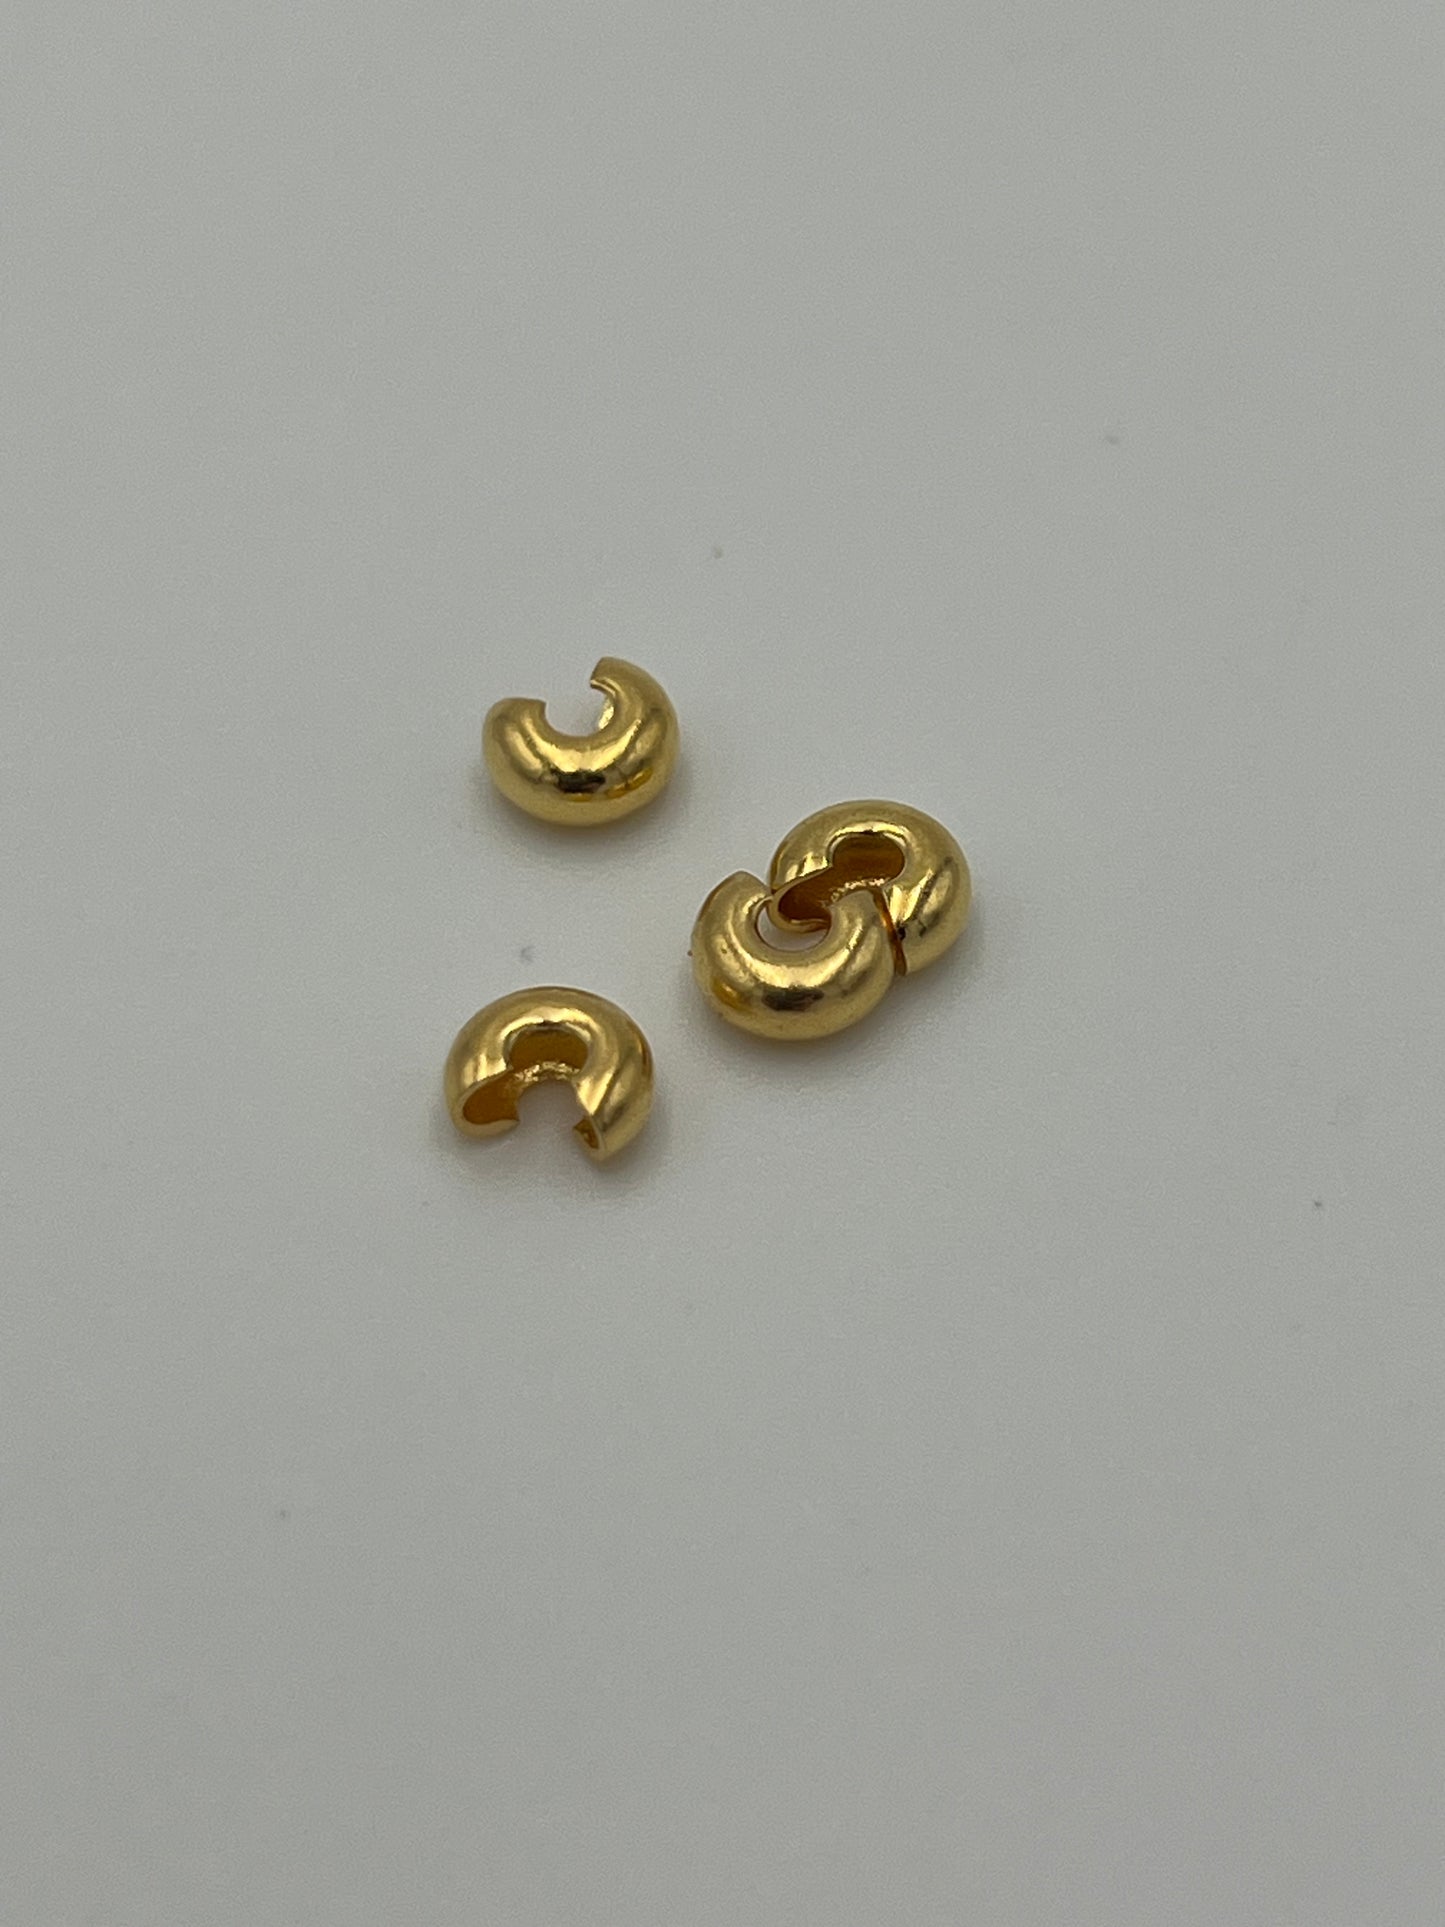 4mm Goldplated Crimp Cover 144 Pack